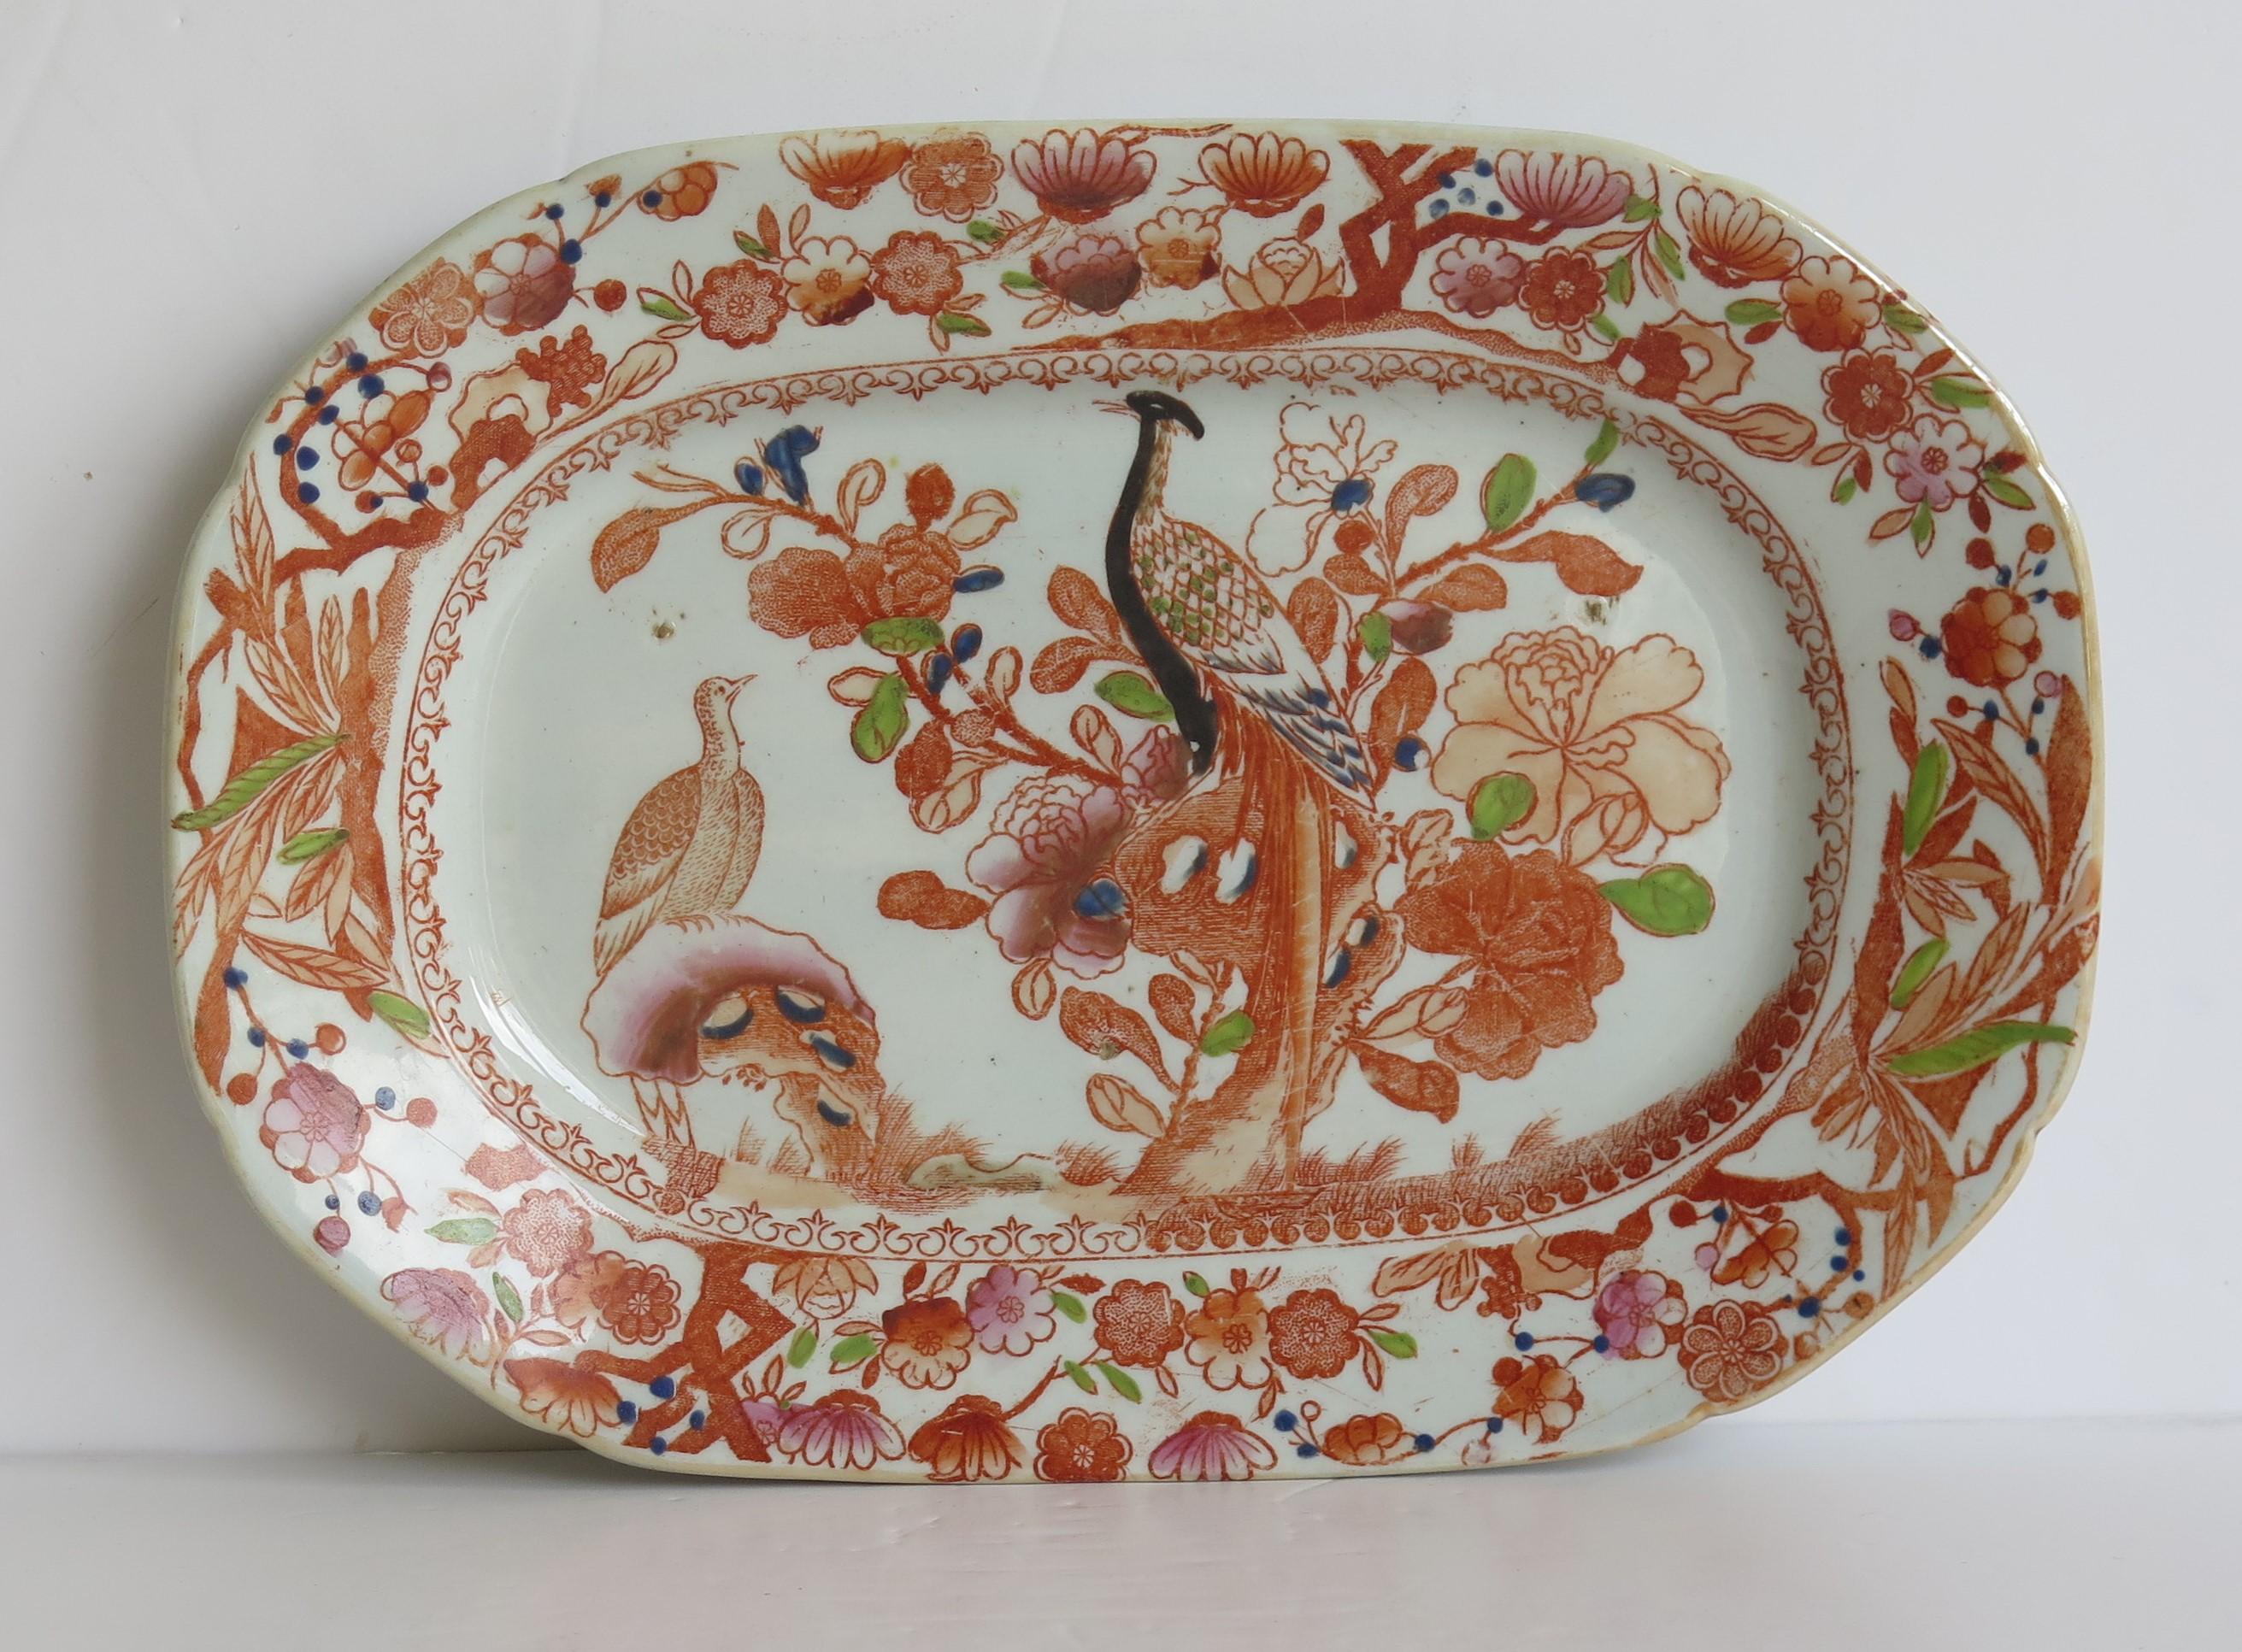 This a good early 19th century platter made by Mason's Ironstone in the Oriental Pheasant pattern, circa 1818.

Very early 19th century Mason's Ironstone platters are fairly rare and this is a good example in a very attractive burnt orange